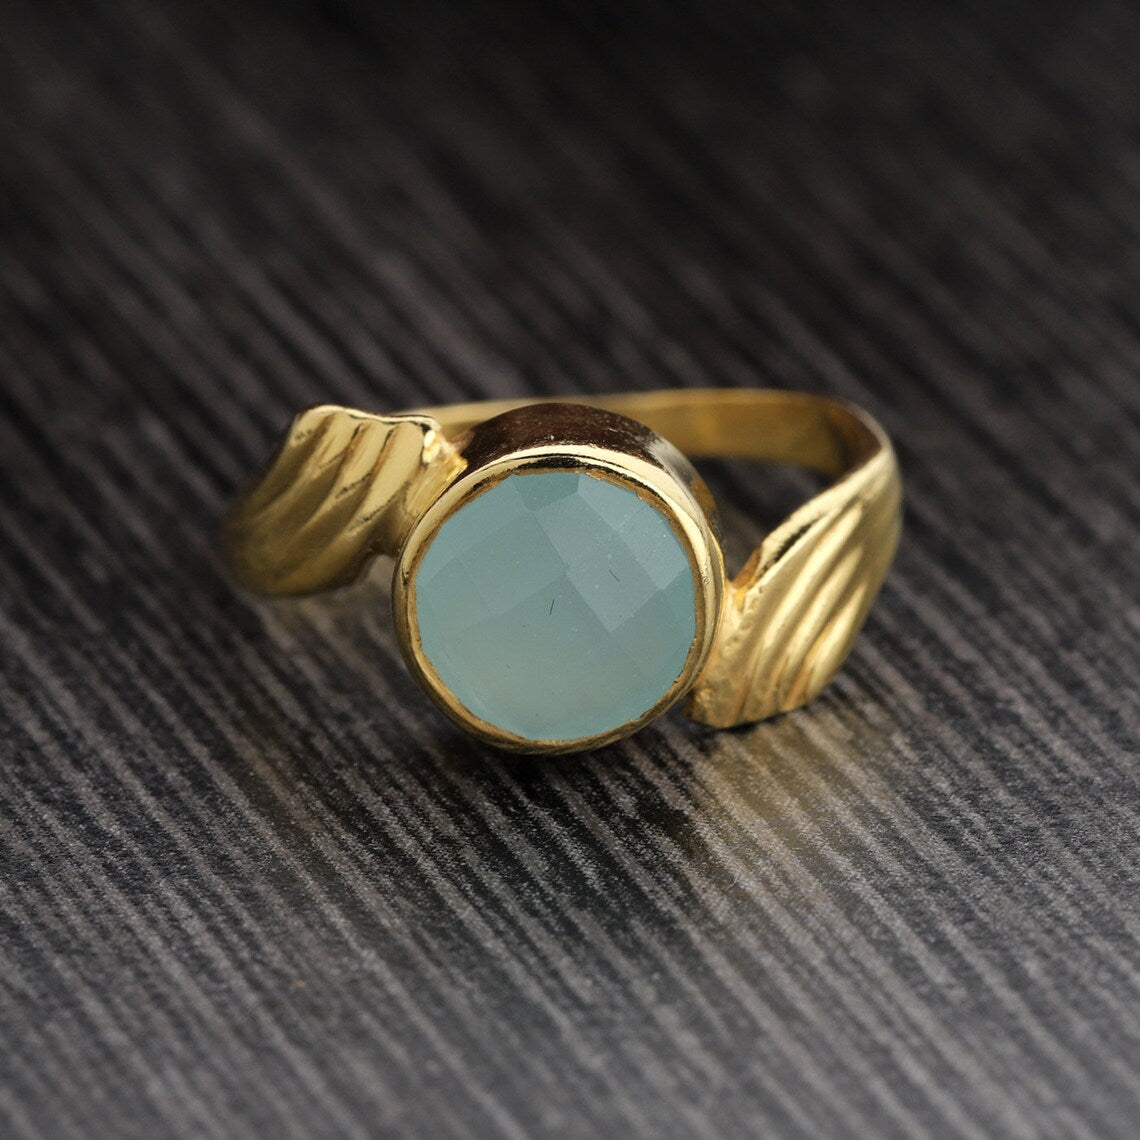 Blue Chalcedony Round Ring, 925 Sterling Silver Ring, Gold Plated Ring, Everyday Ring, Handmade Ring, Stackable Ring, Proposal Ring